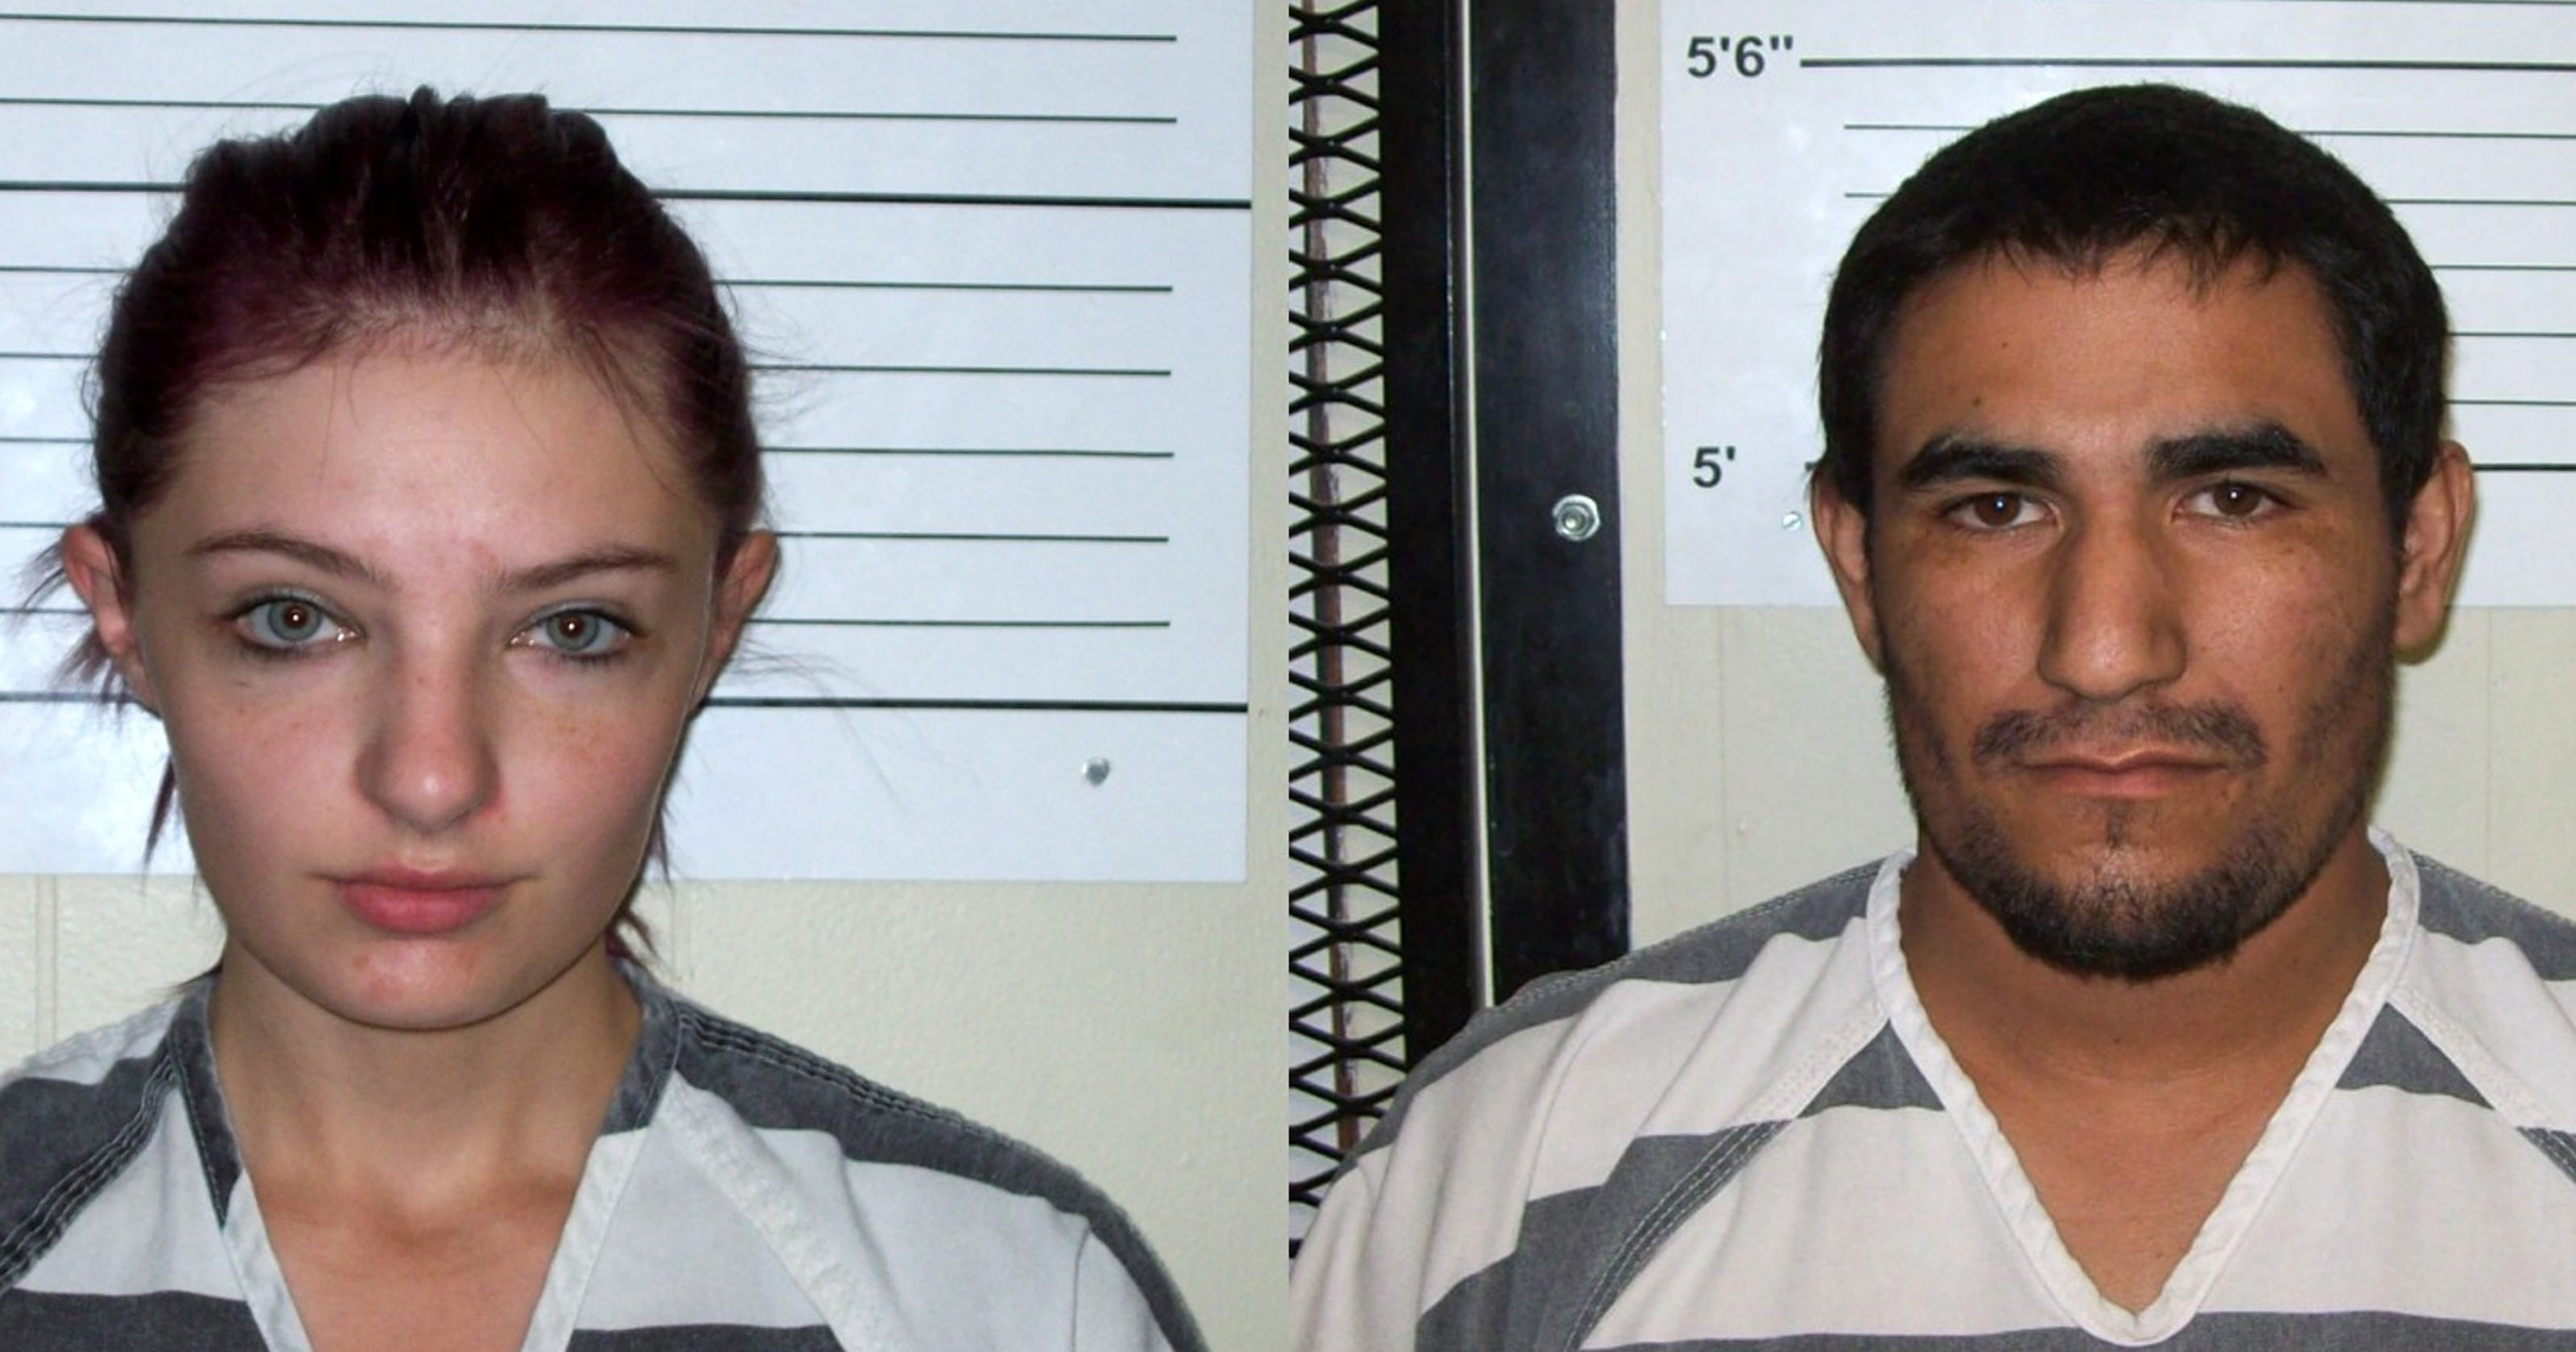 Iowa child death: Parents charged after infant found with maggots3200 x 1680